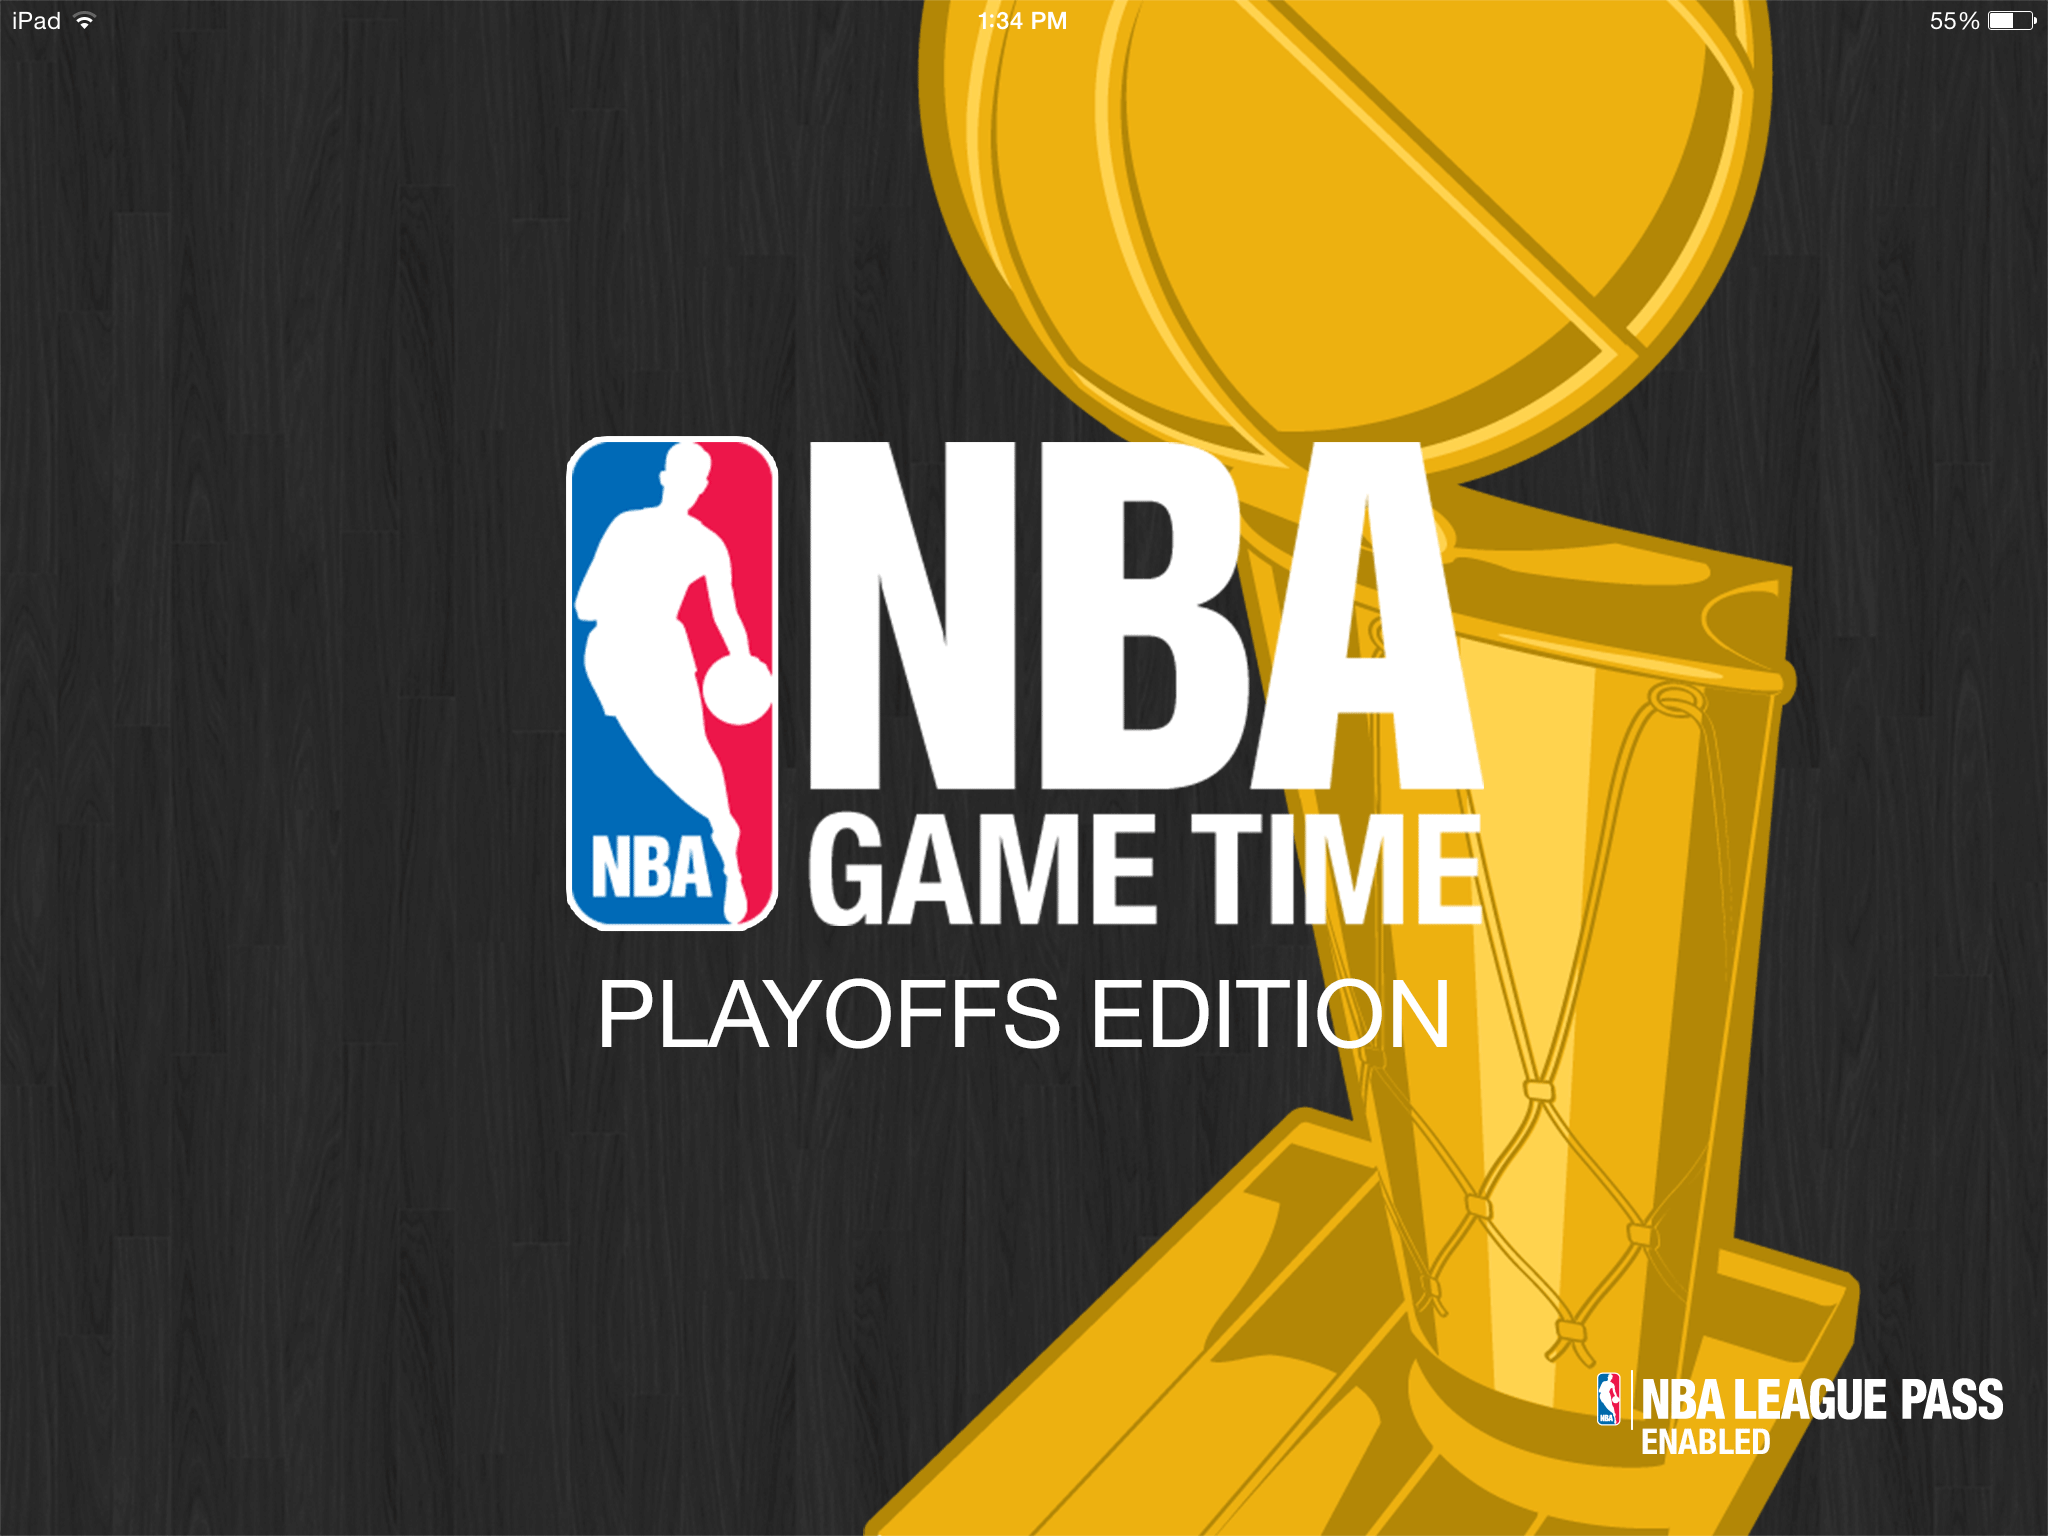 NBA Game Time Logo - nba gametime - The Daily Mind